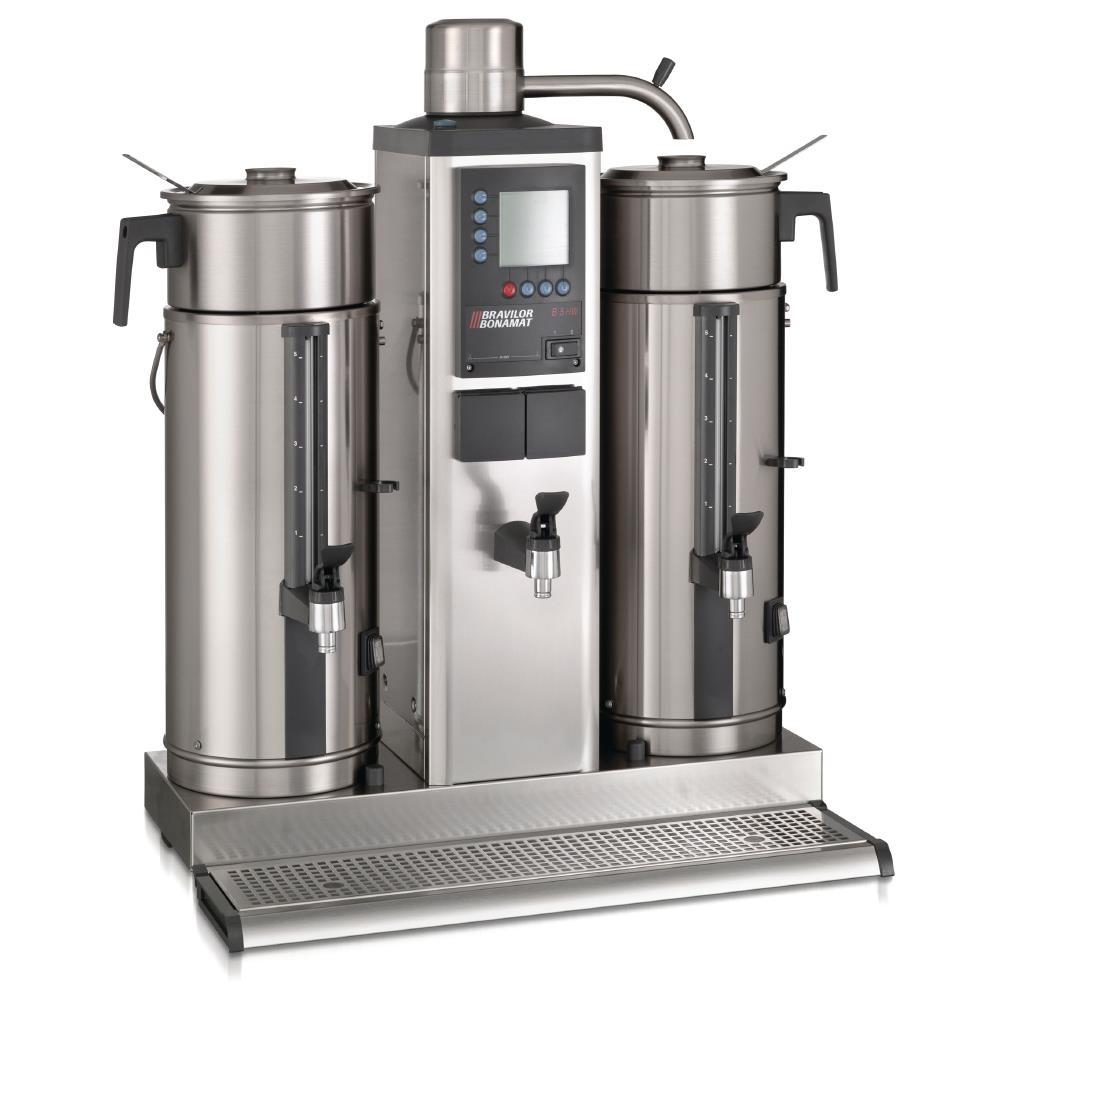 Bravilor B20 HW Bulk Coffee Brewer with 2x20Ltr Coffee Urns and Hot Water Tap 3 Phase - DC693-3P  - 3